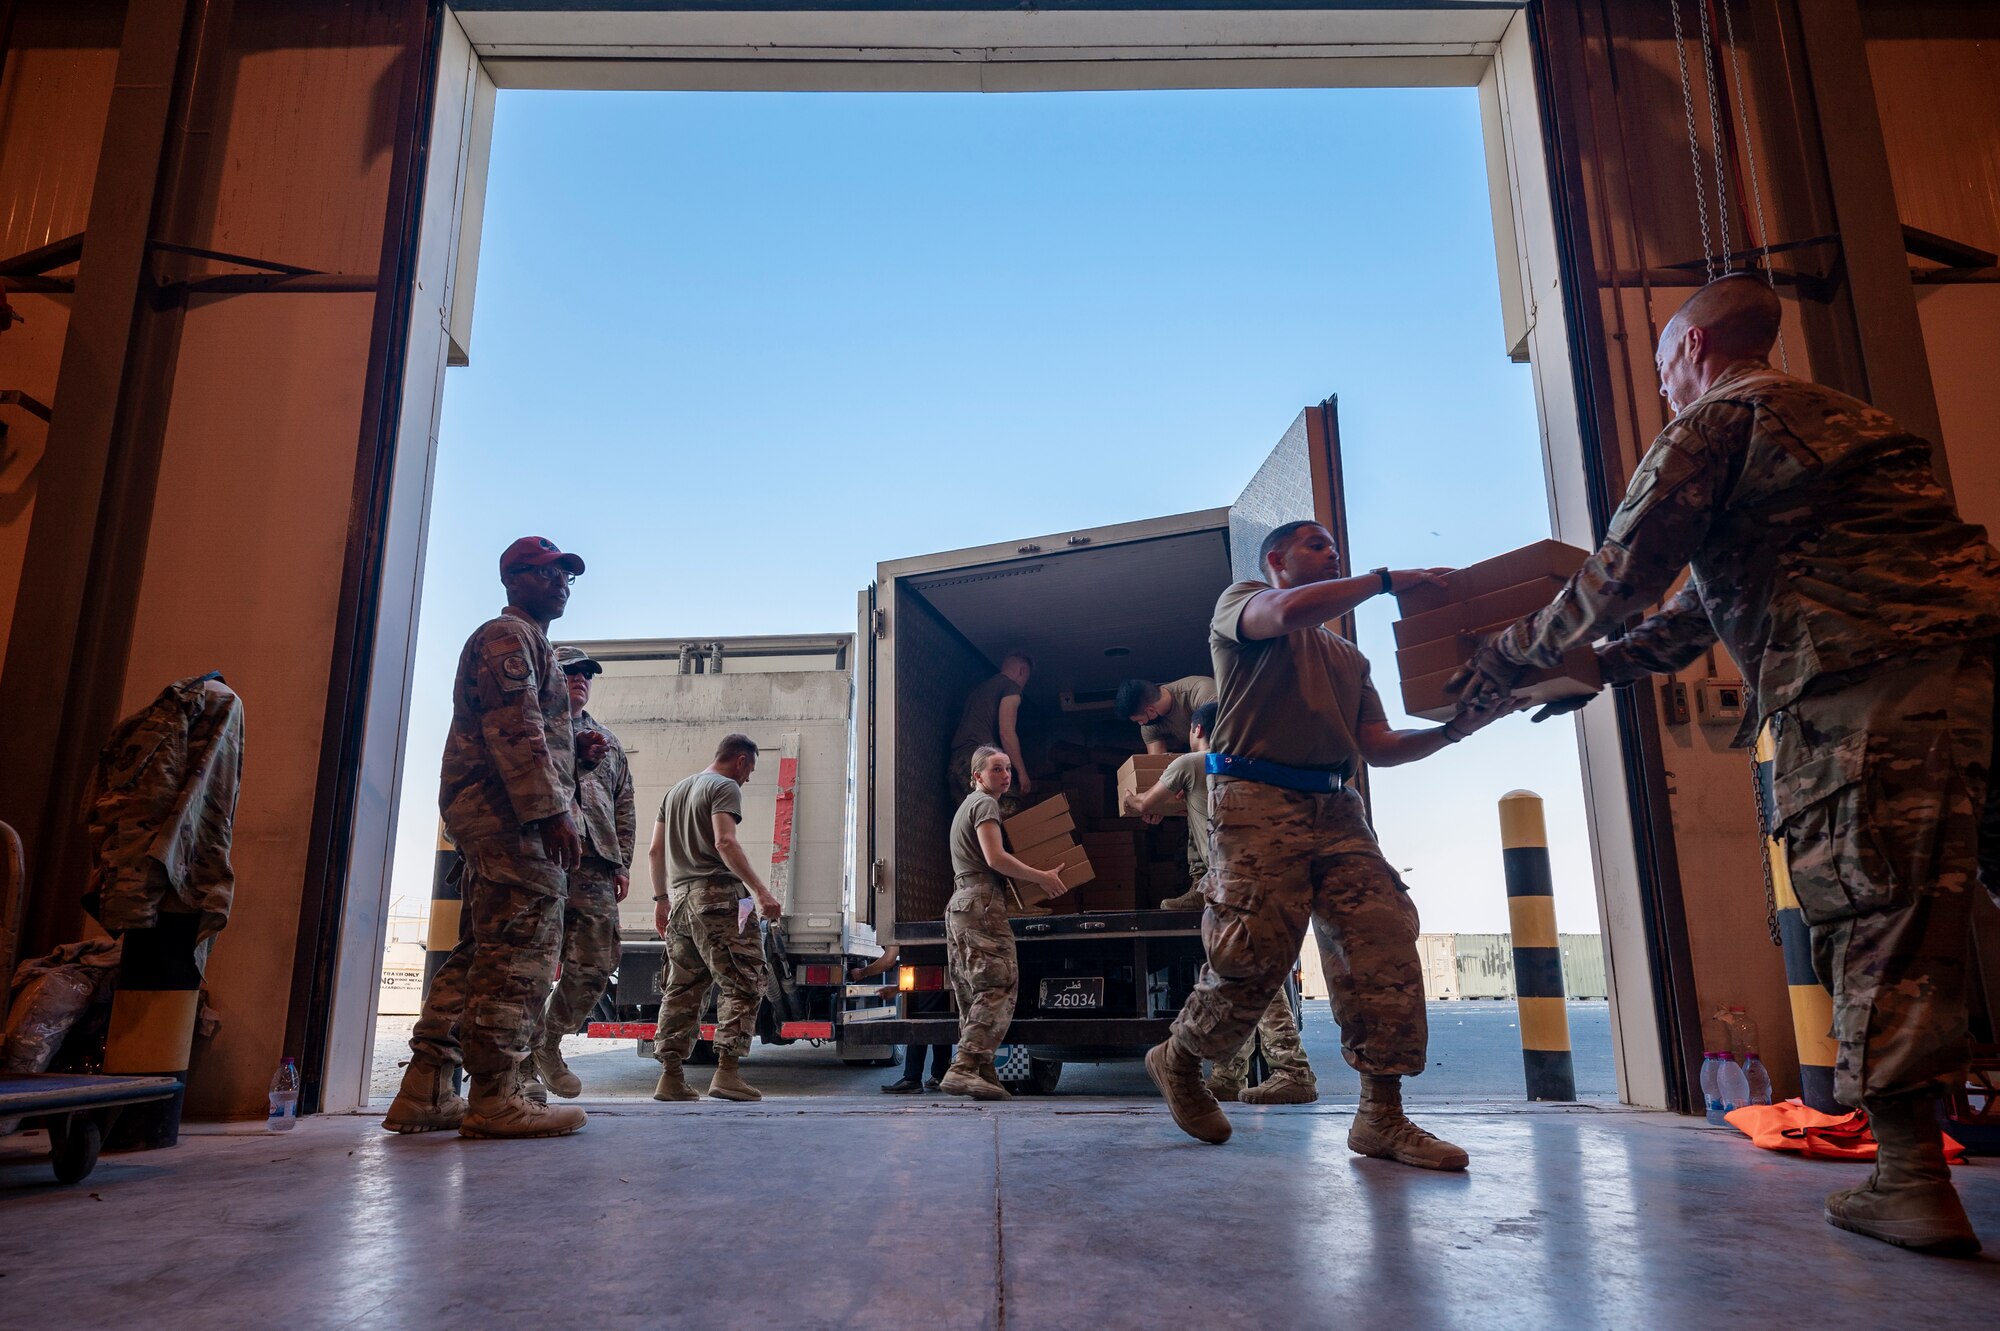 Airmen unload food from a truck for Afghanistan evacuees, Aug. 23, 2021, at Al Udeid Air Base, Qatar.